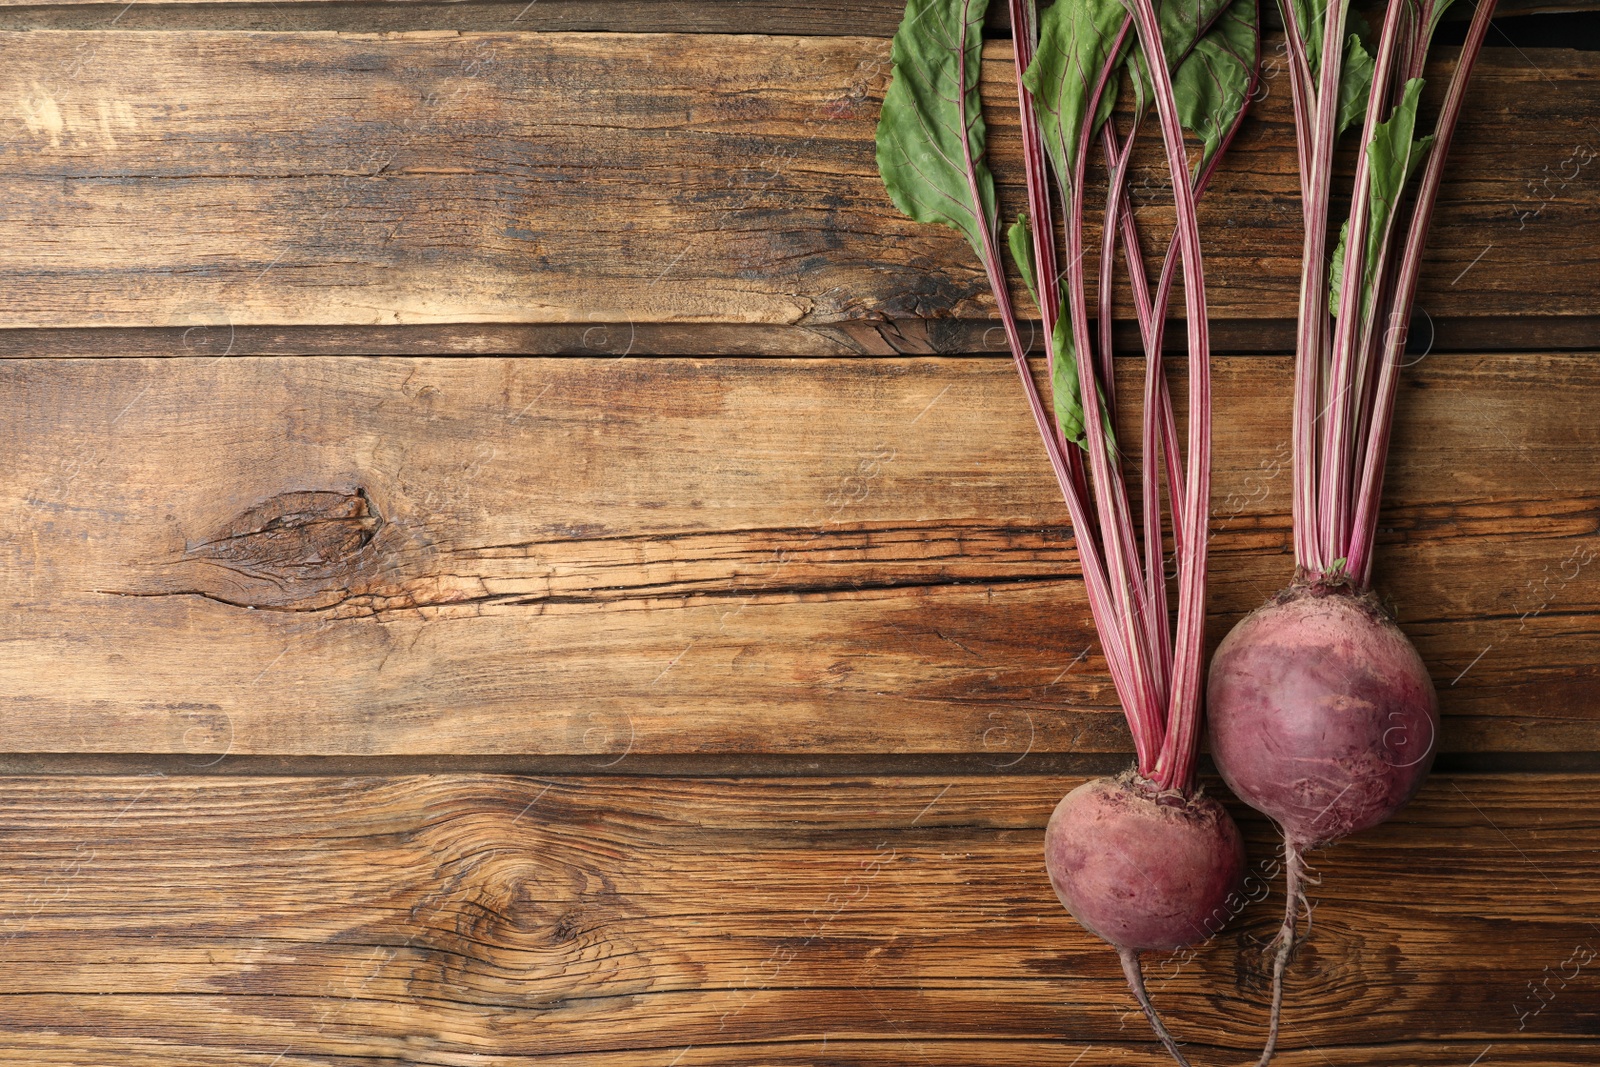 Photo of Raw ripe beets on wooden table, flat lay. Space for text